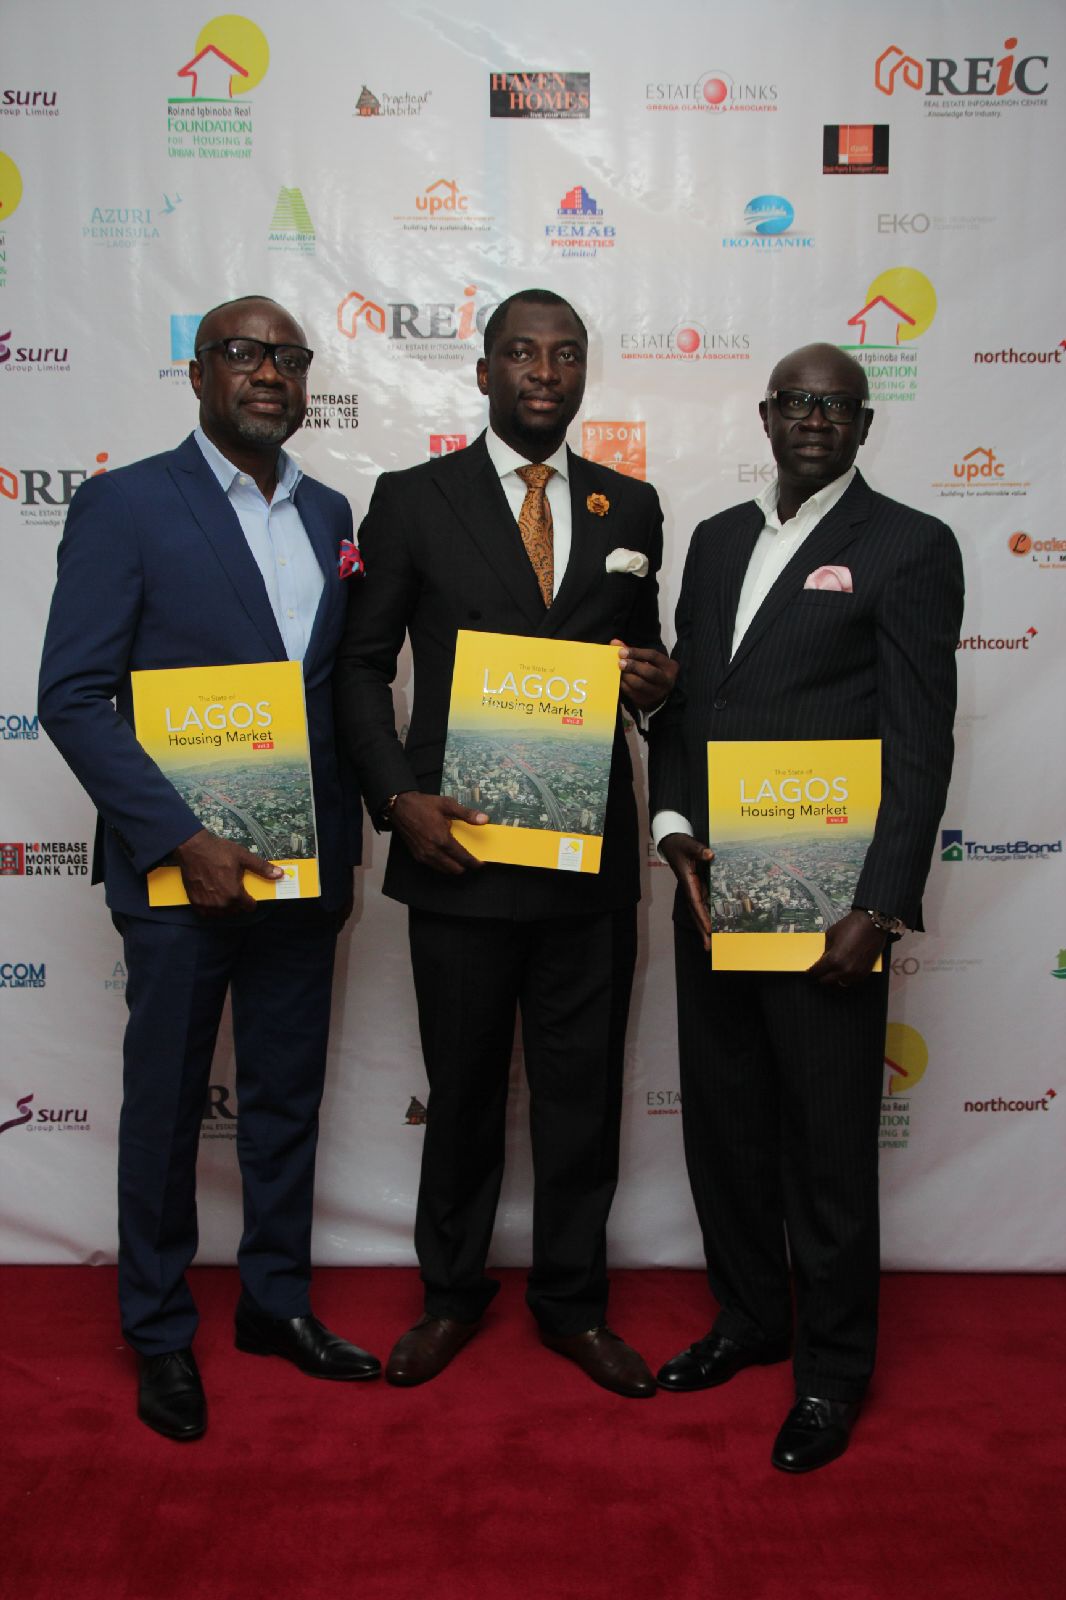  From left to right, Mr. Gbenga Olaniyan - MD/CEO, Estate Links International, Mr Roland Igbinoba, Executive Vice Chairman, (RIRFHUD) and Mr. Mustapha Njie - MD/CEO TAF Africa Homes, Nigeria/Gambia.